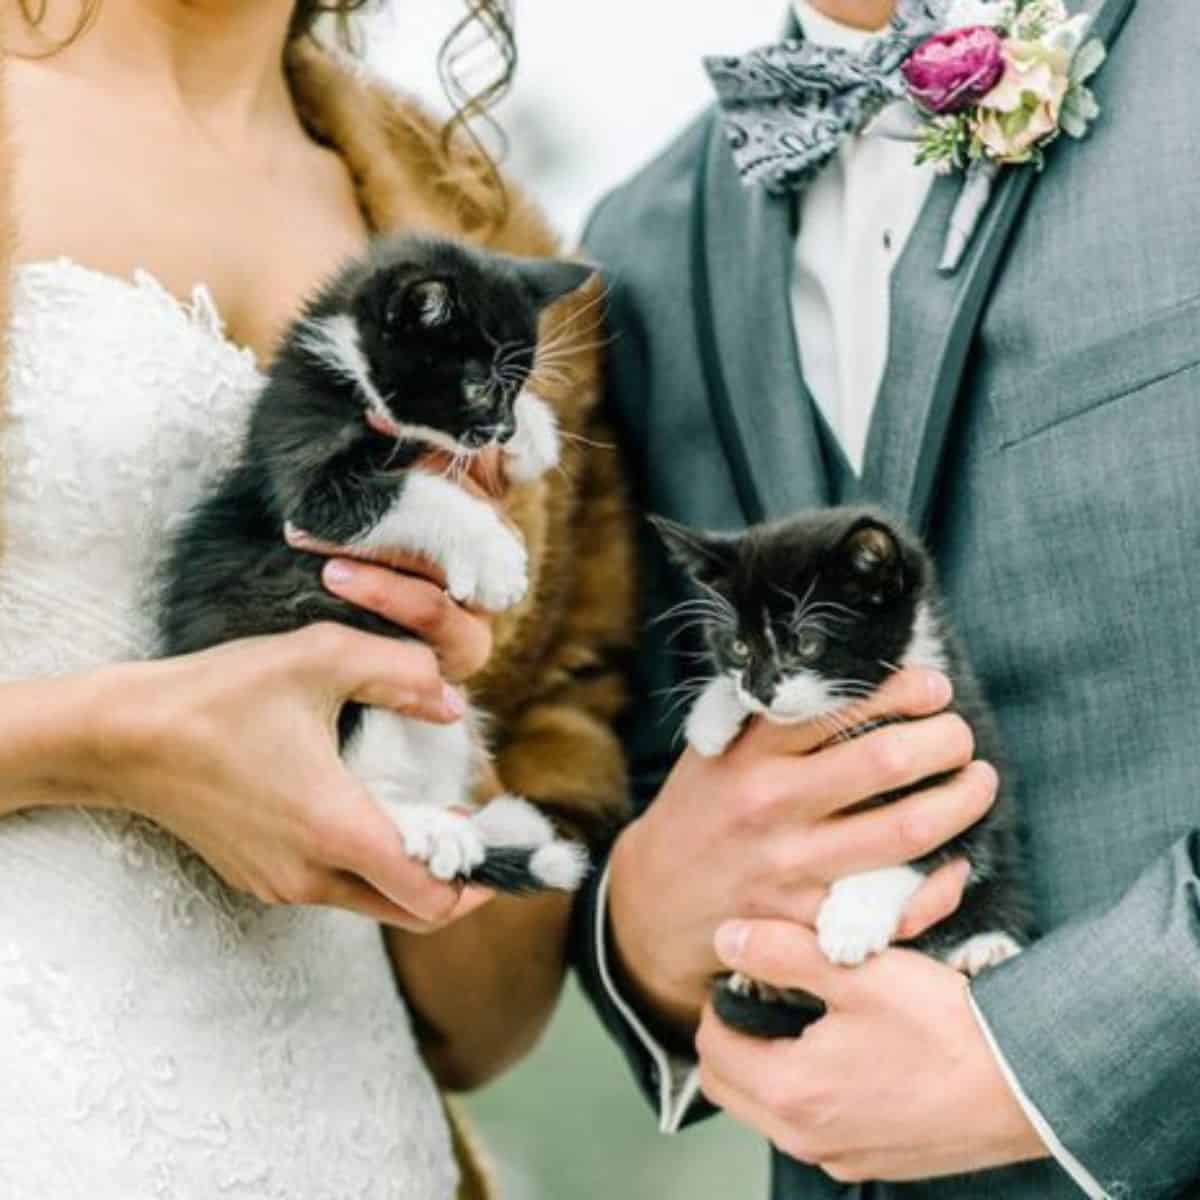 close-up photo of the couple each holding a cat